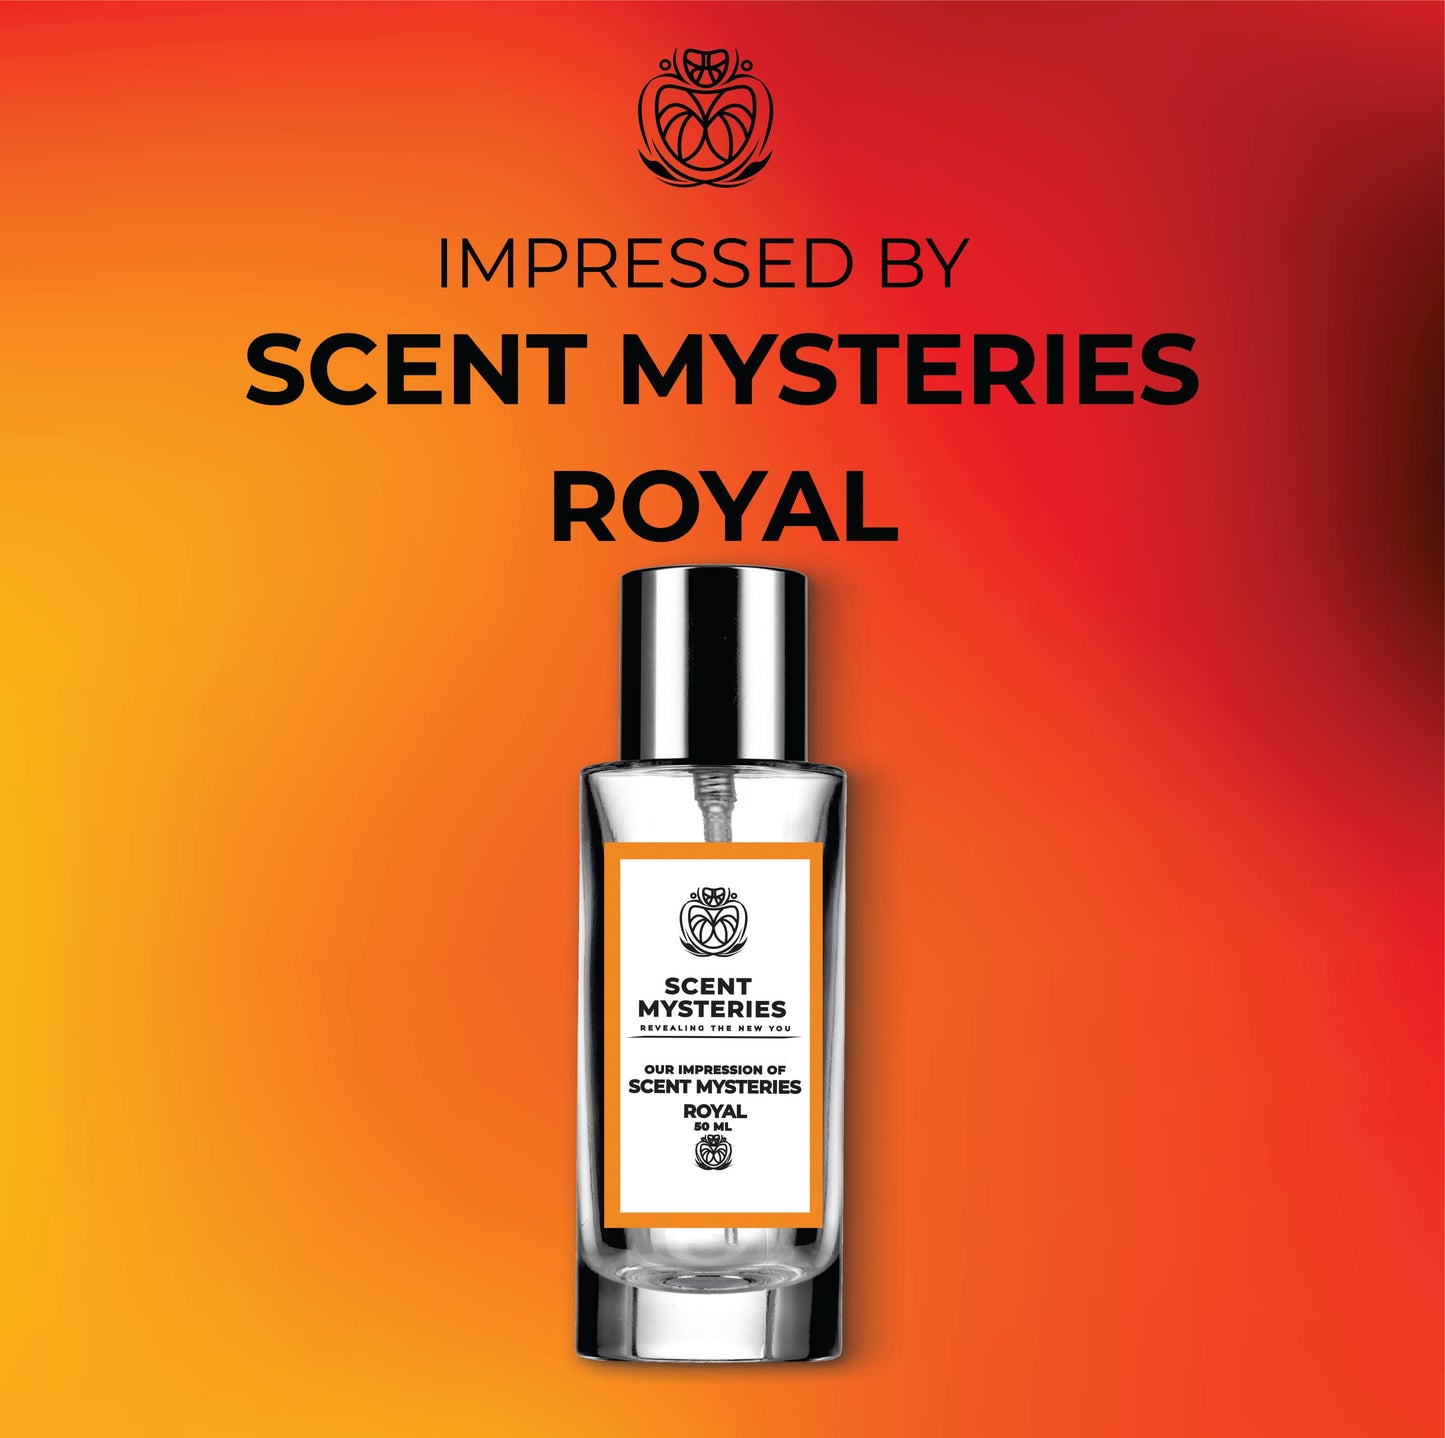 Scent Mysteries Royal